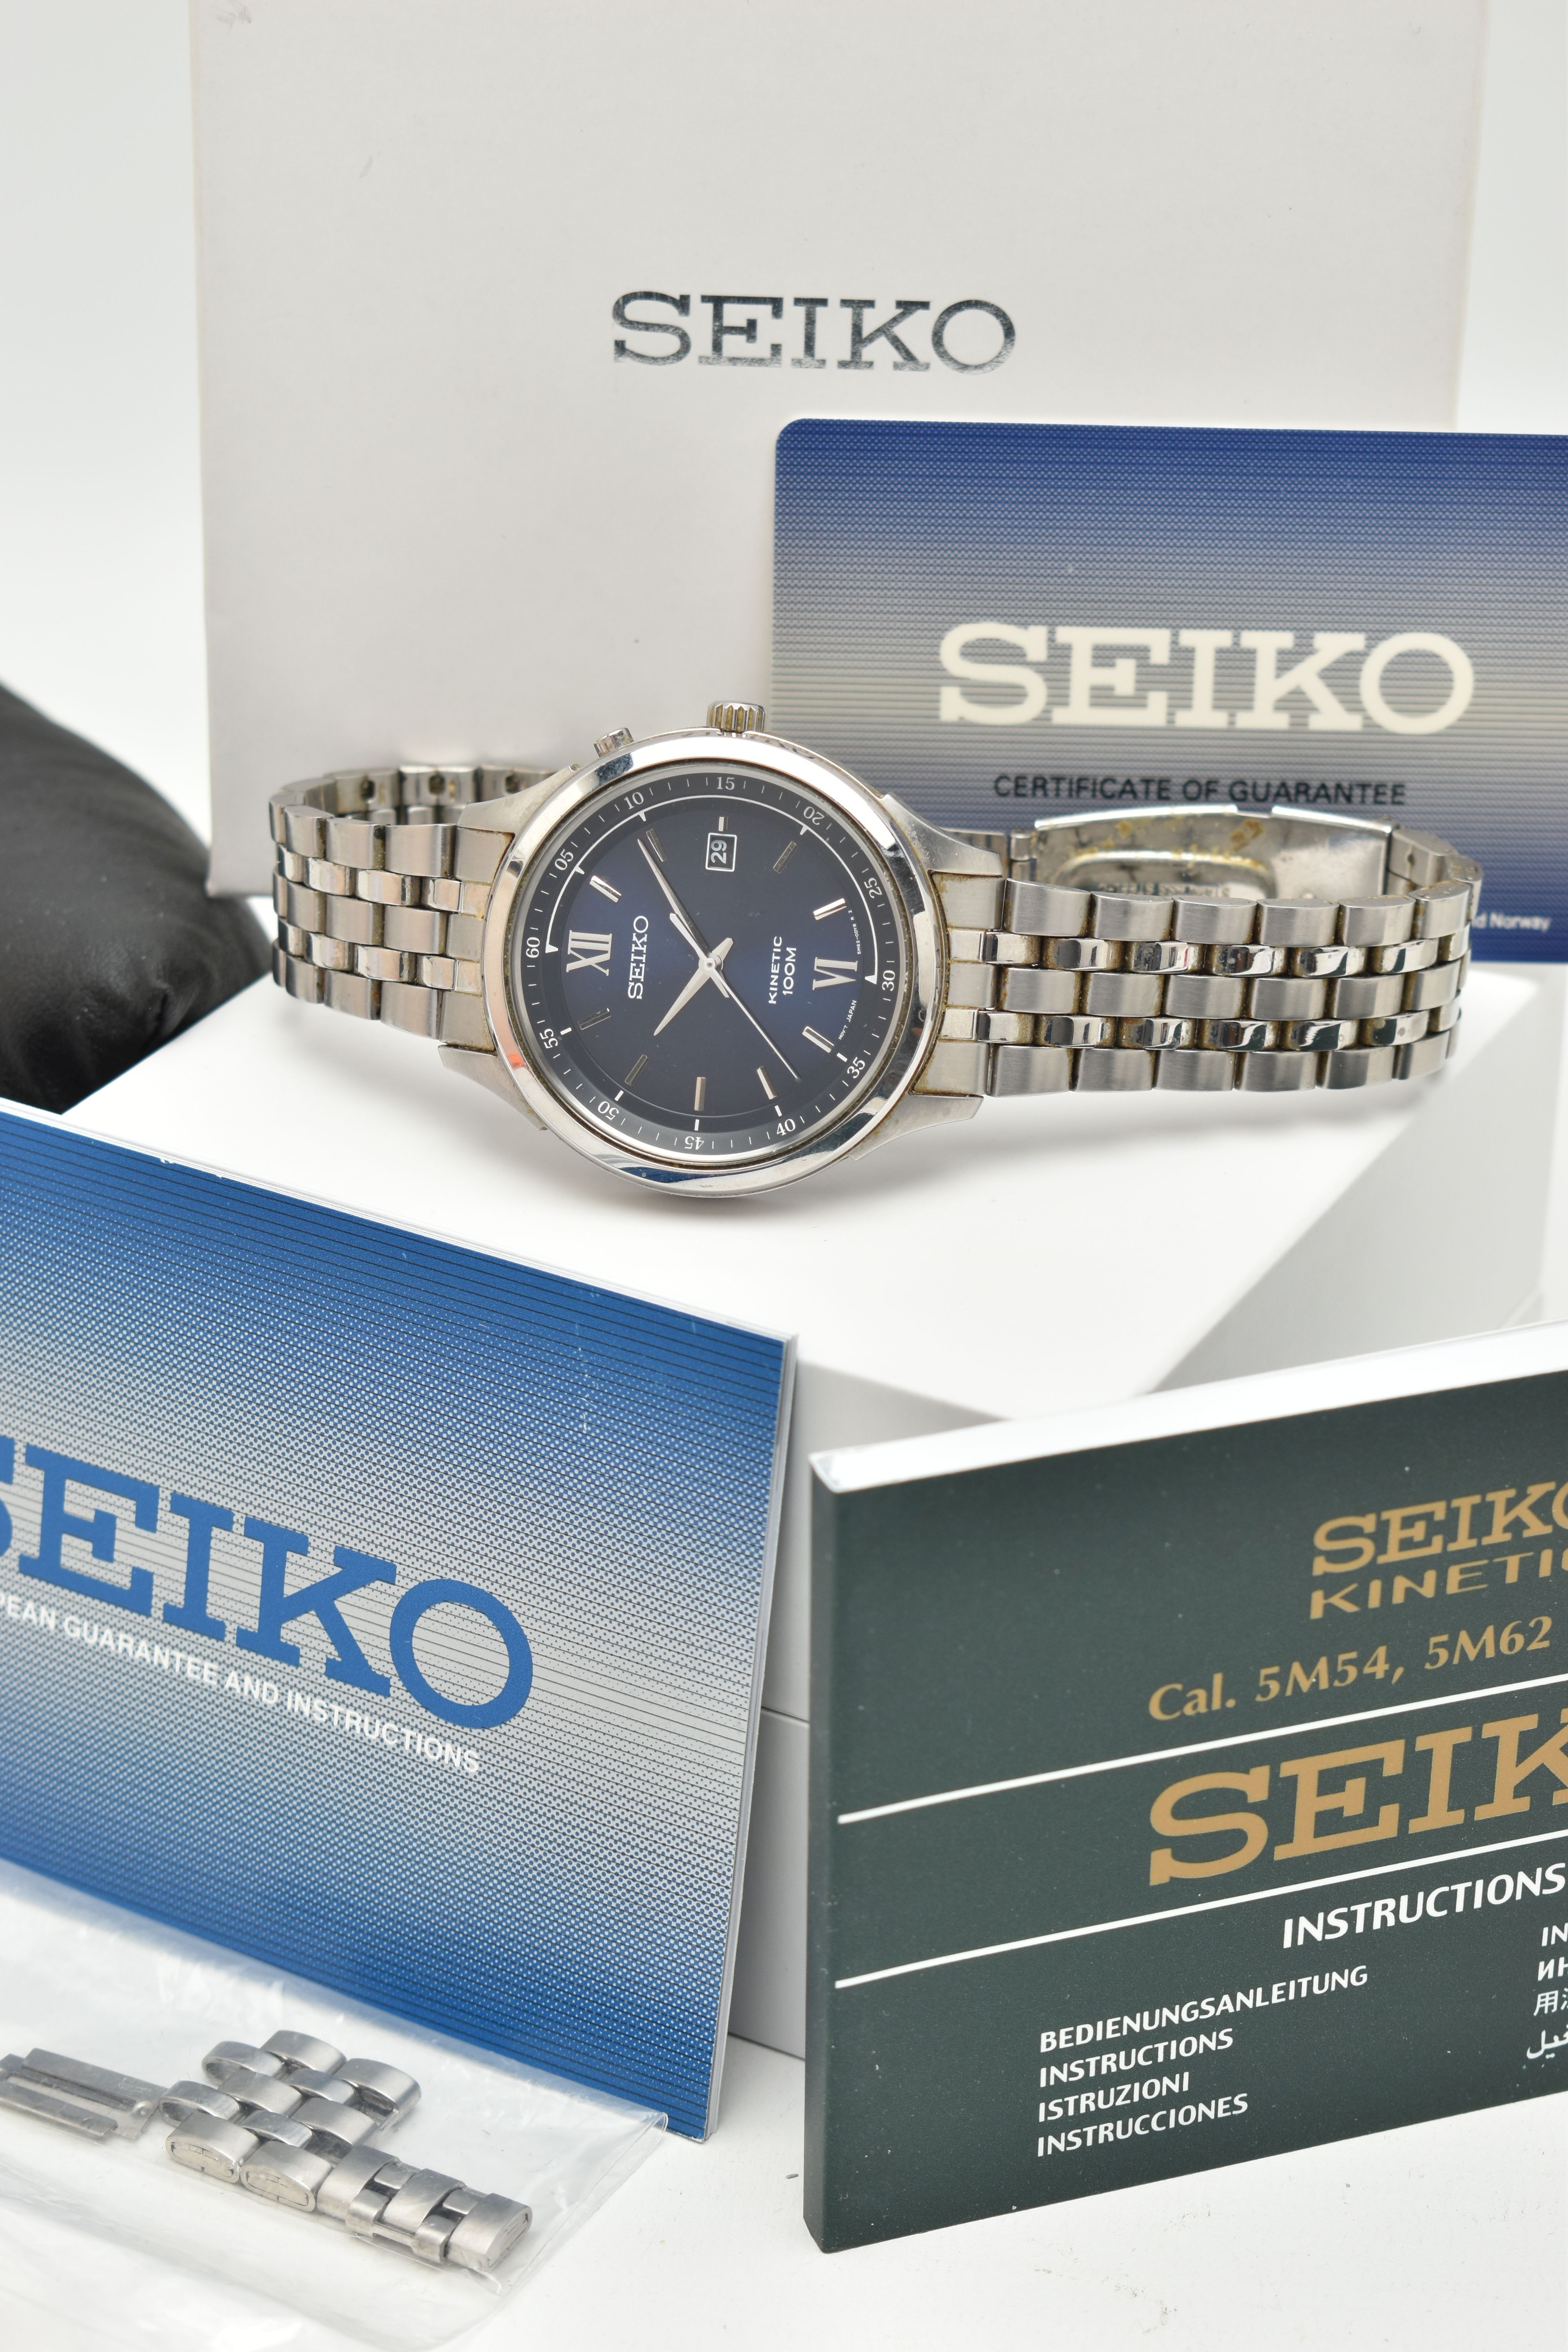 A GENTS 'SEIKO' WRISTWATCH, kinetic movement, round blue dial signed 'Seiko kinetic 100m', baton - Image 7 of 8